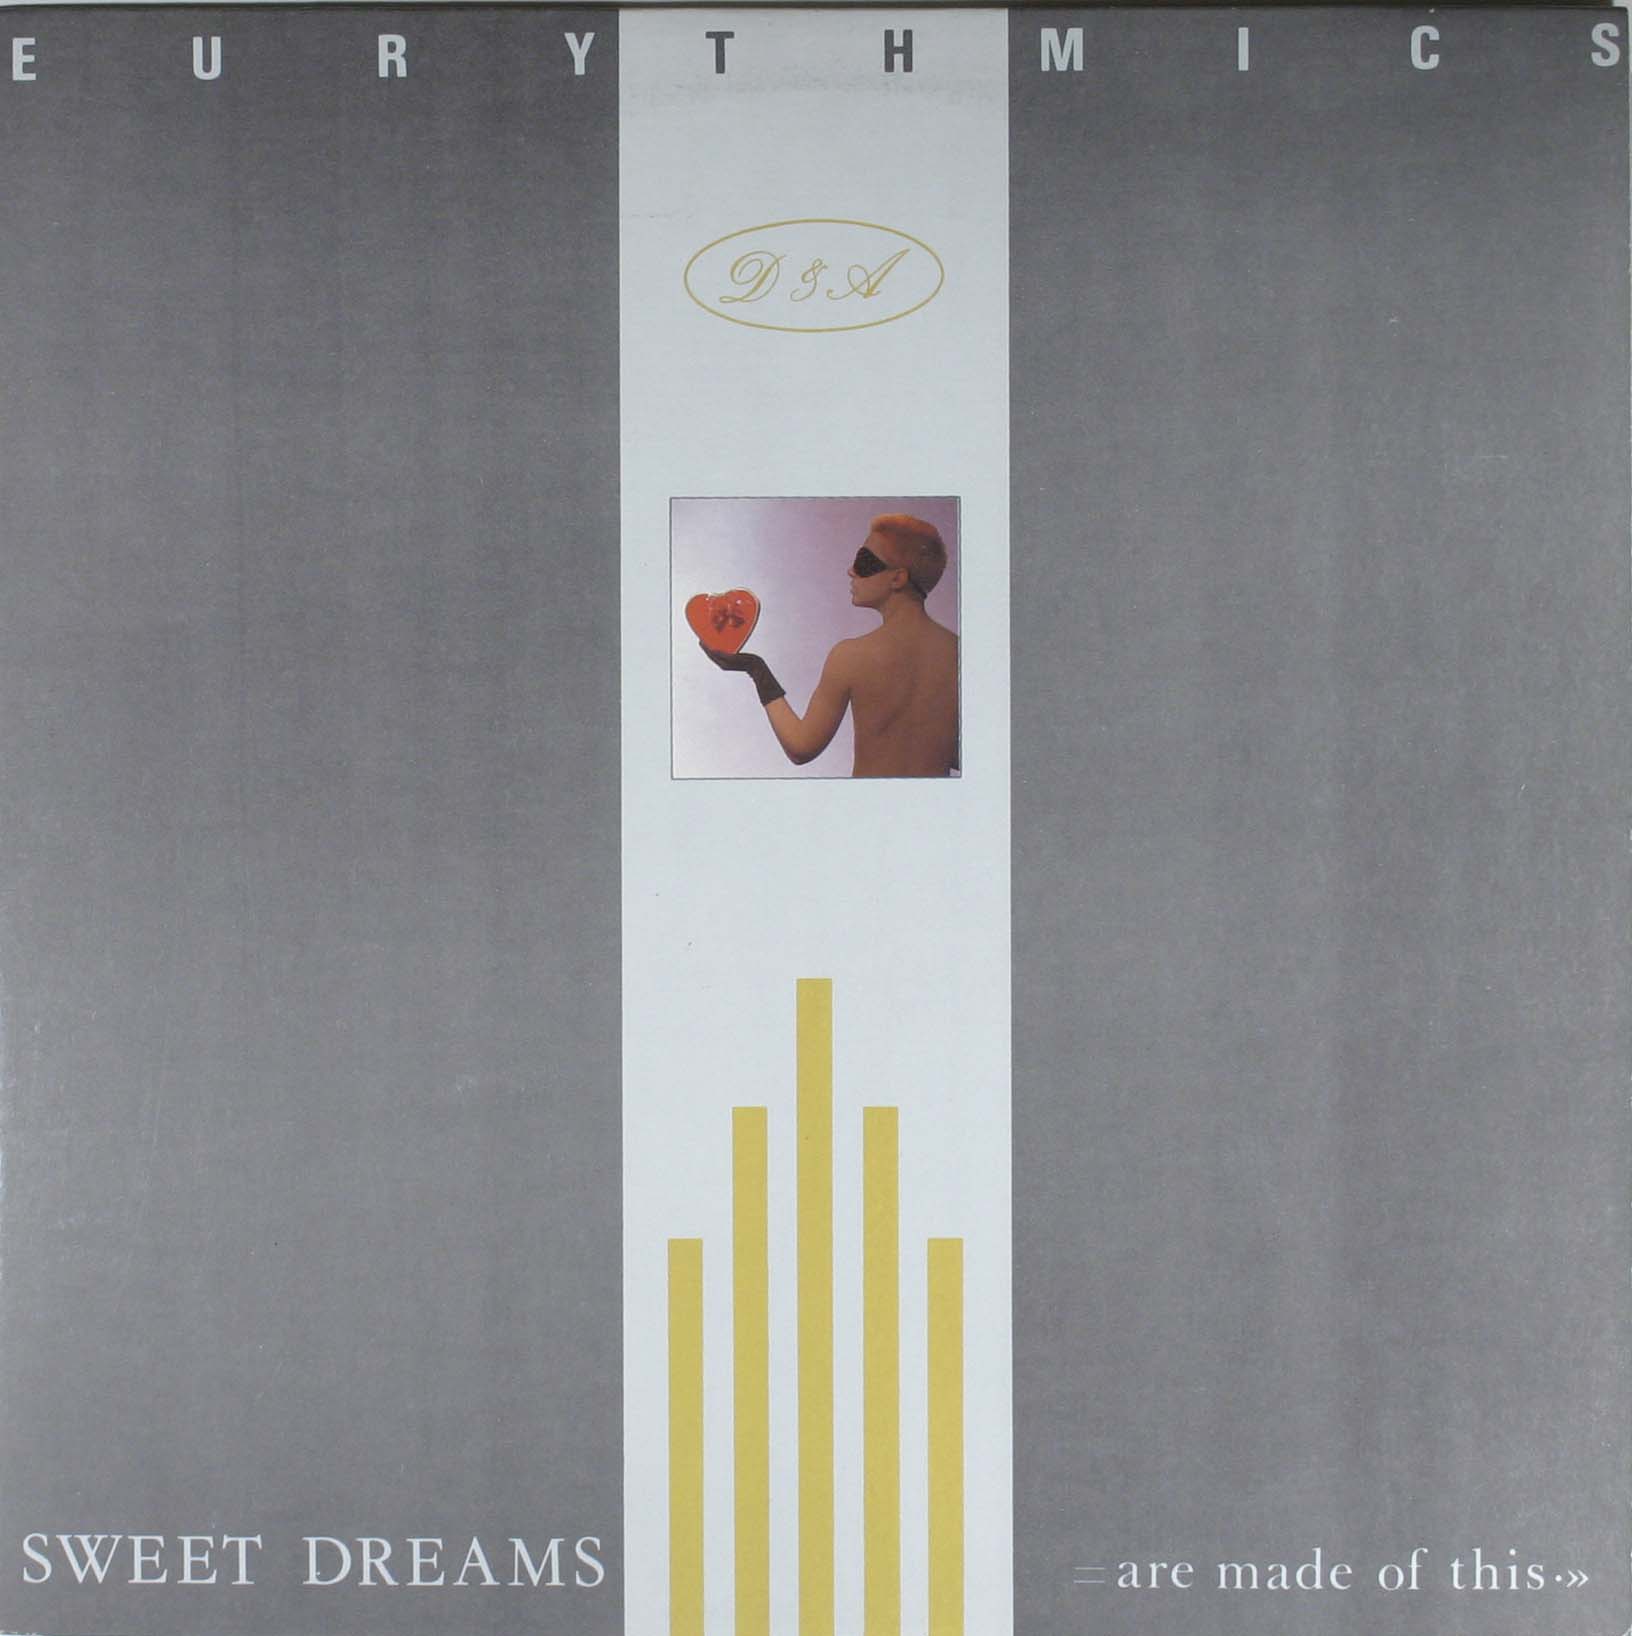 Sweet dreams are made of this песня. Eurythmics - Sweet Dreams (are made of this) (2 Trust Refix). Eurythmics "Sweet Dreams". Eurythmics.Sweet Dreams диск картинки. Sweet Dreams are made of this.